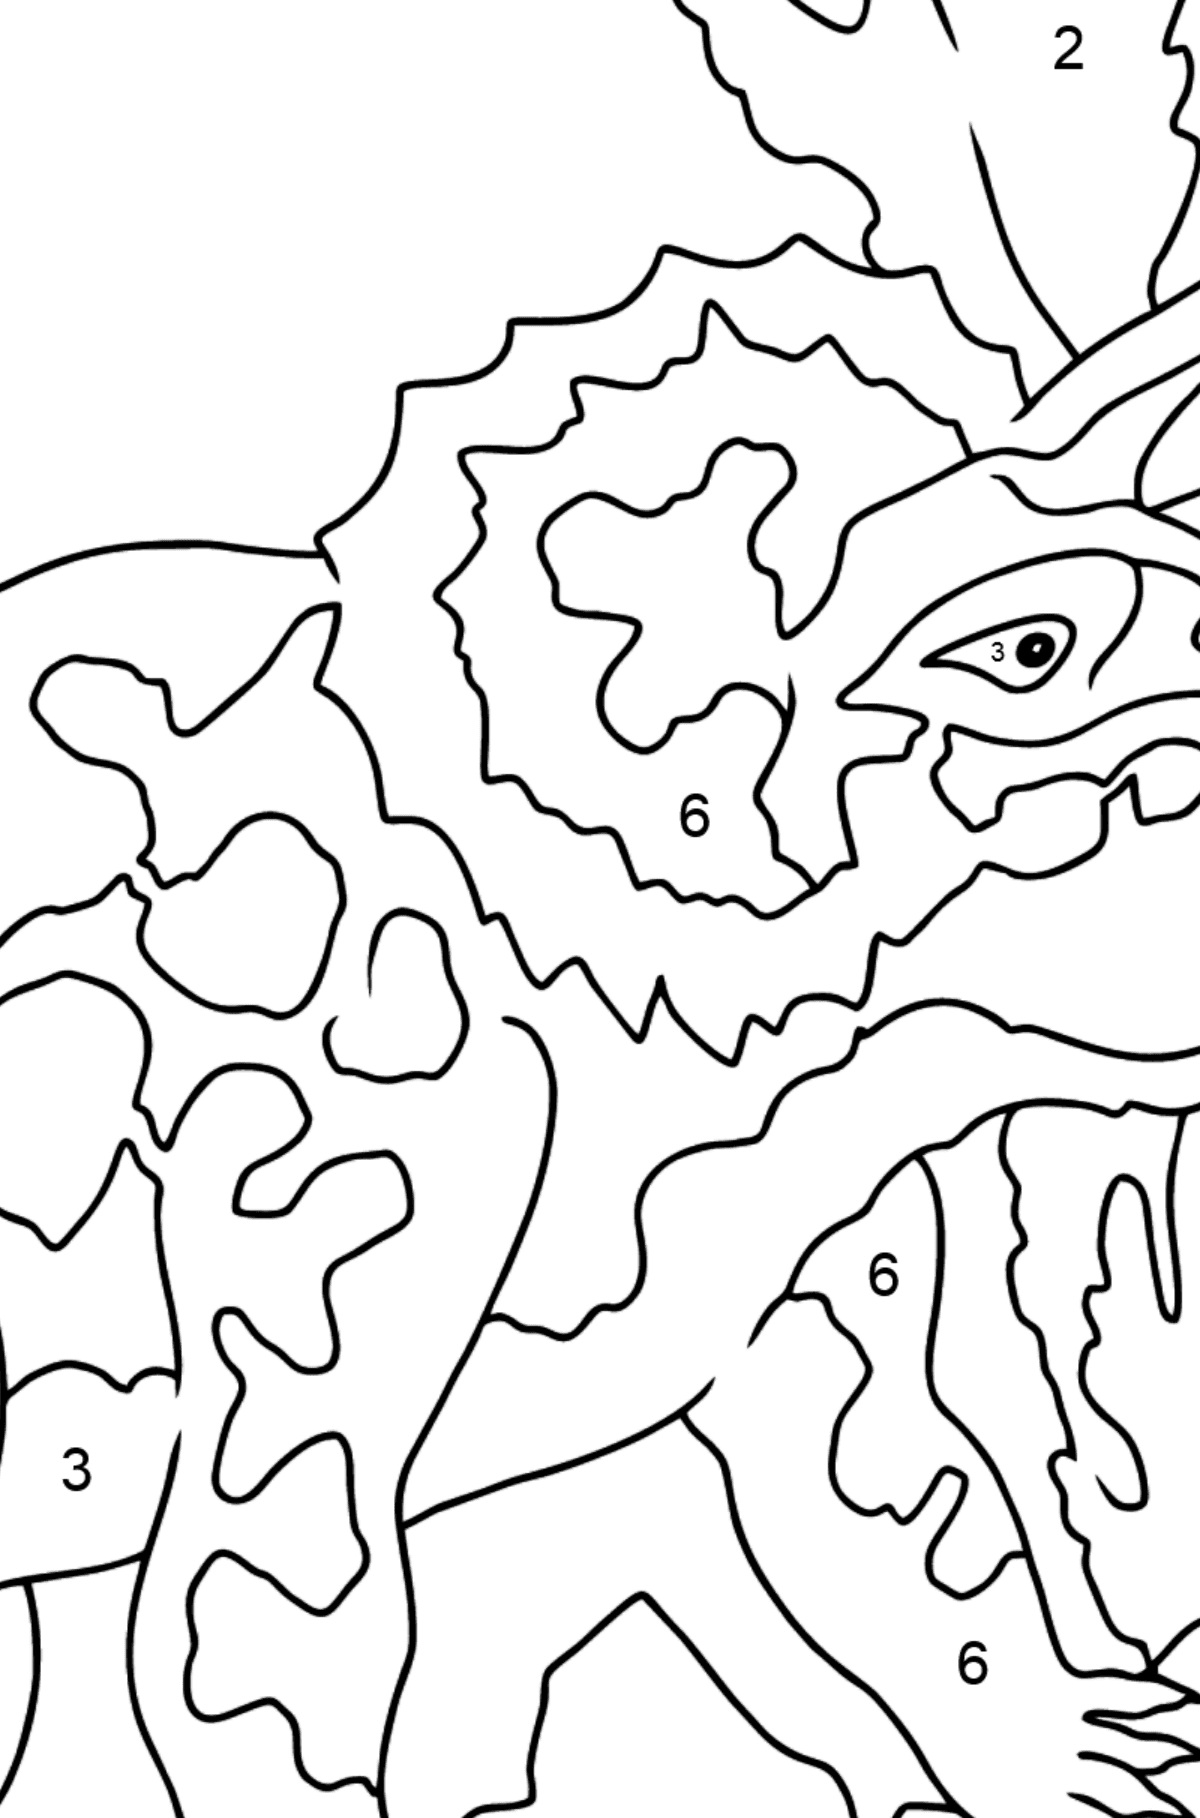 Triceratops Coloring Page - Coloring by Numbers for Kids